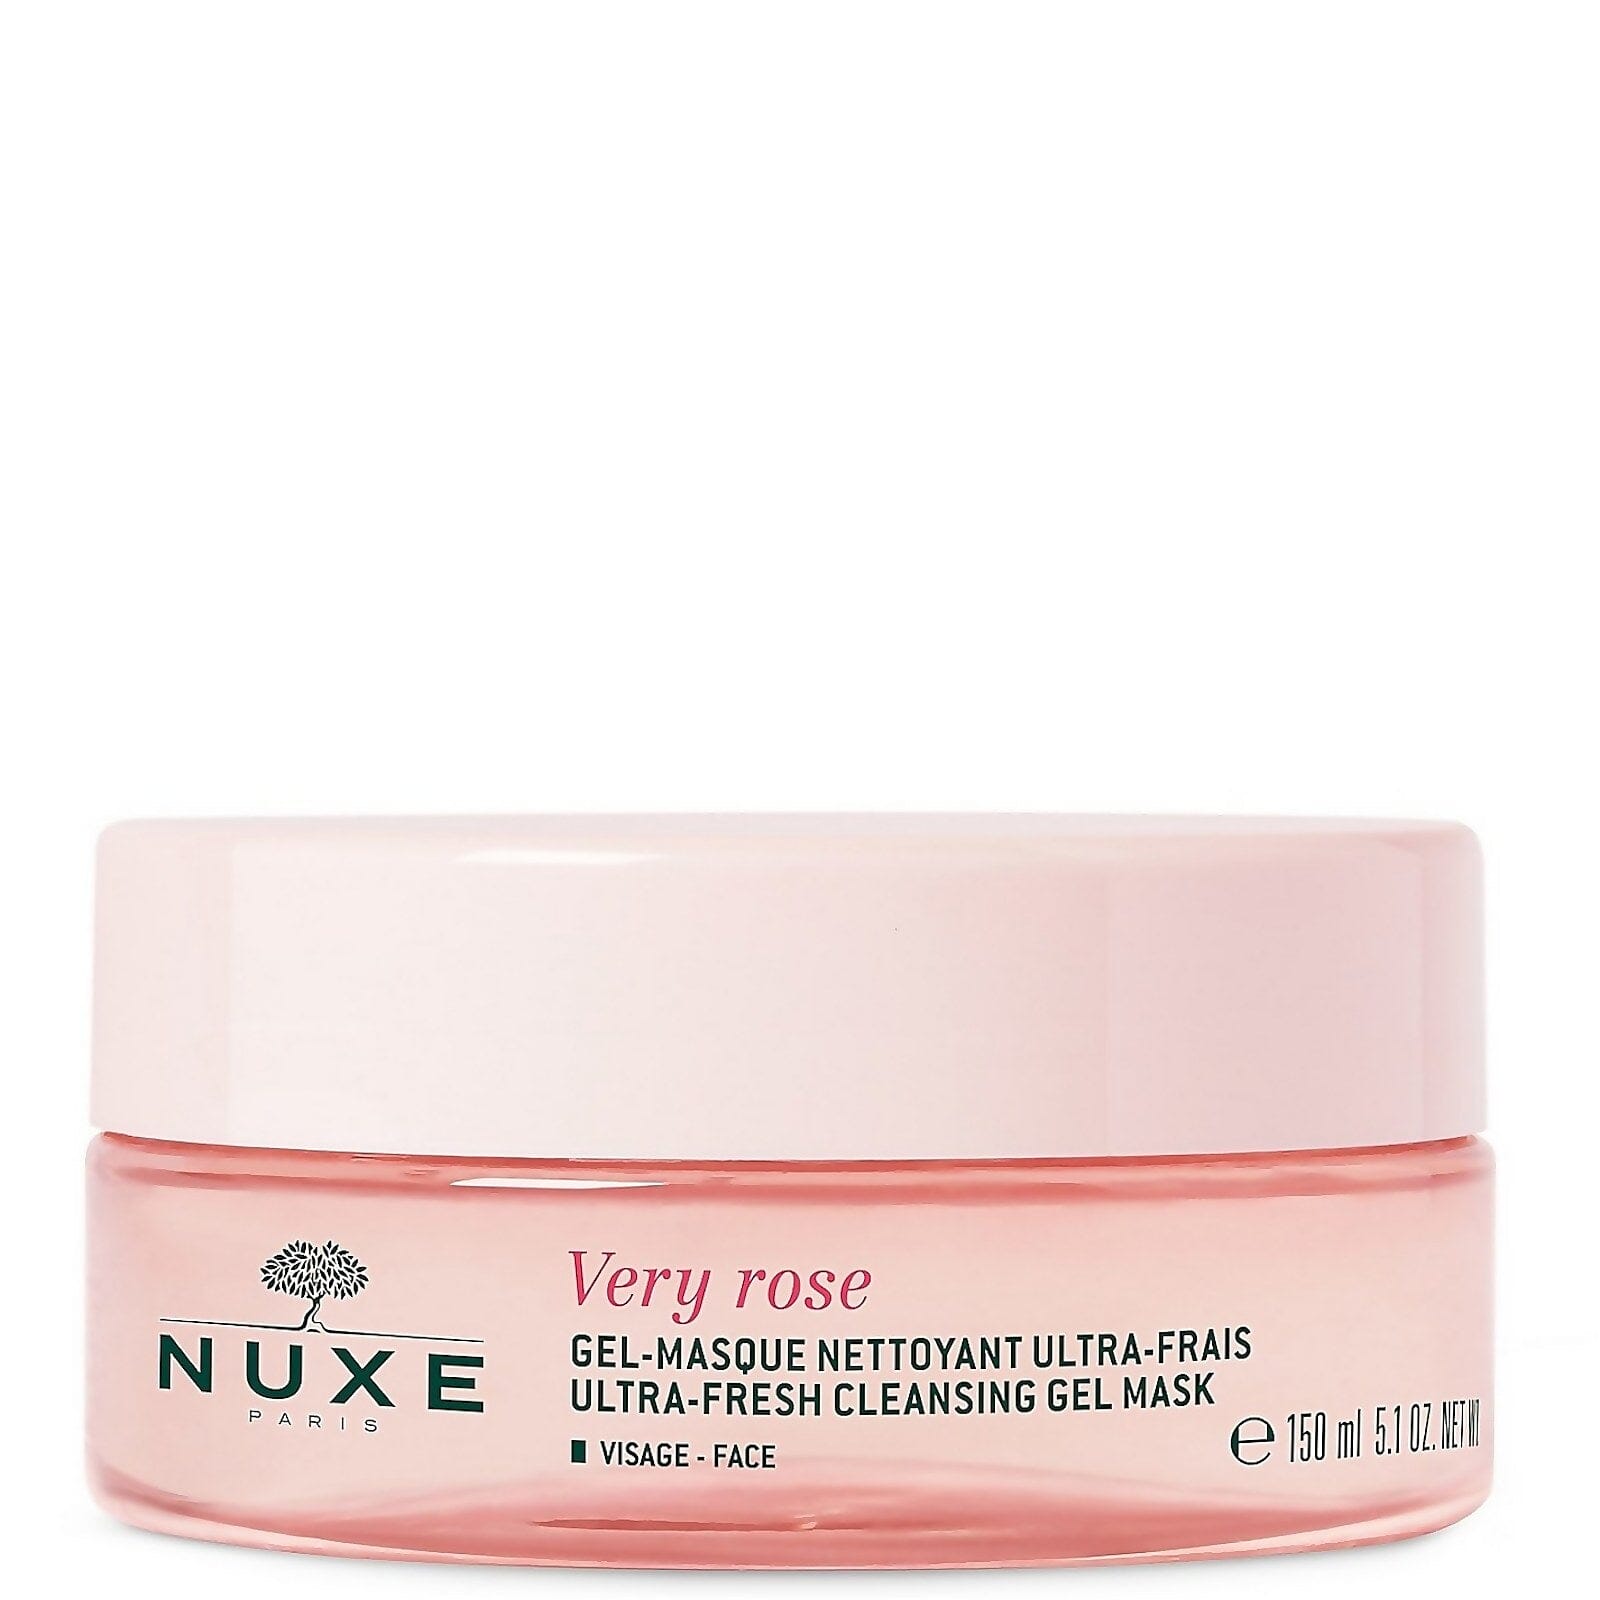 Nuxe Very Rose Ultra-Fresh Cleansing Gel Mask Nuxe 5.1 oz. (150ml) Shop at Exclusive Beauty Club